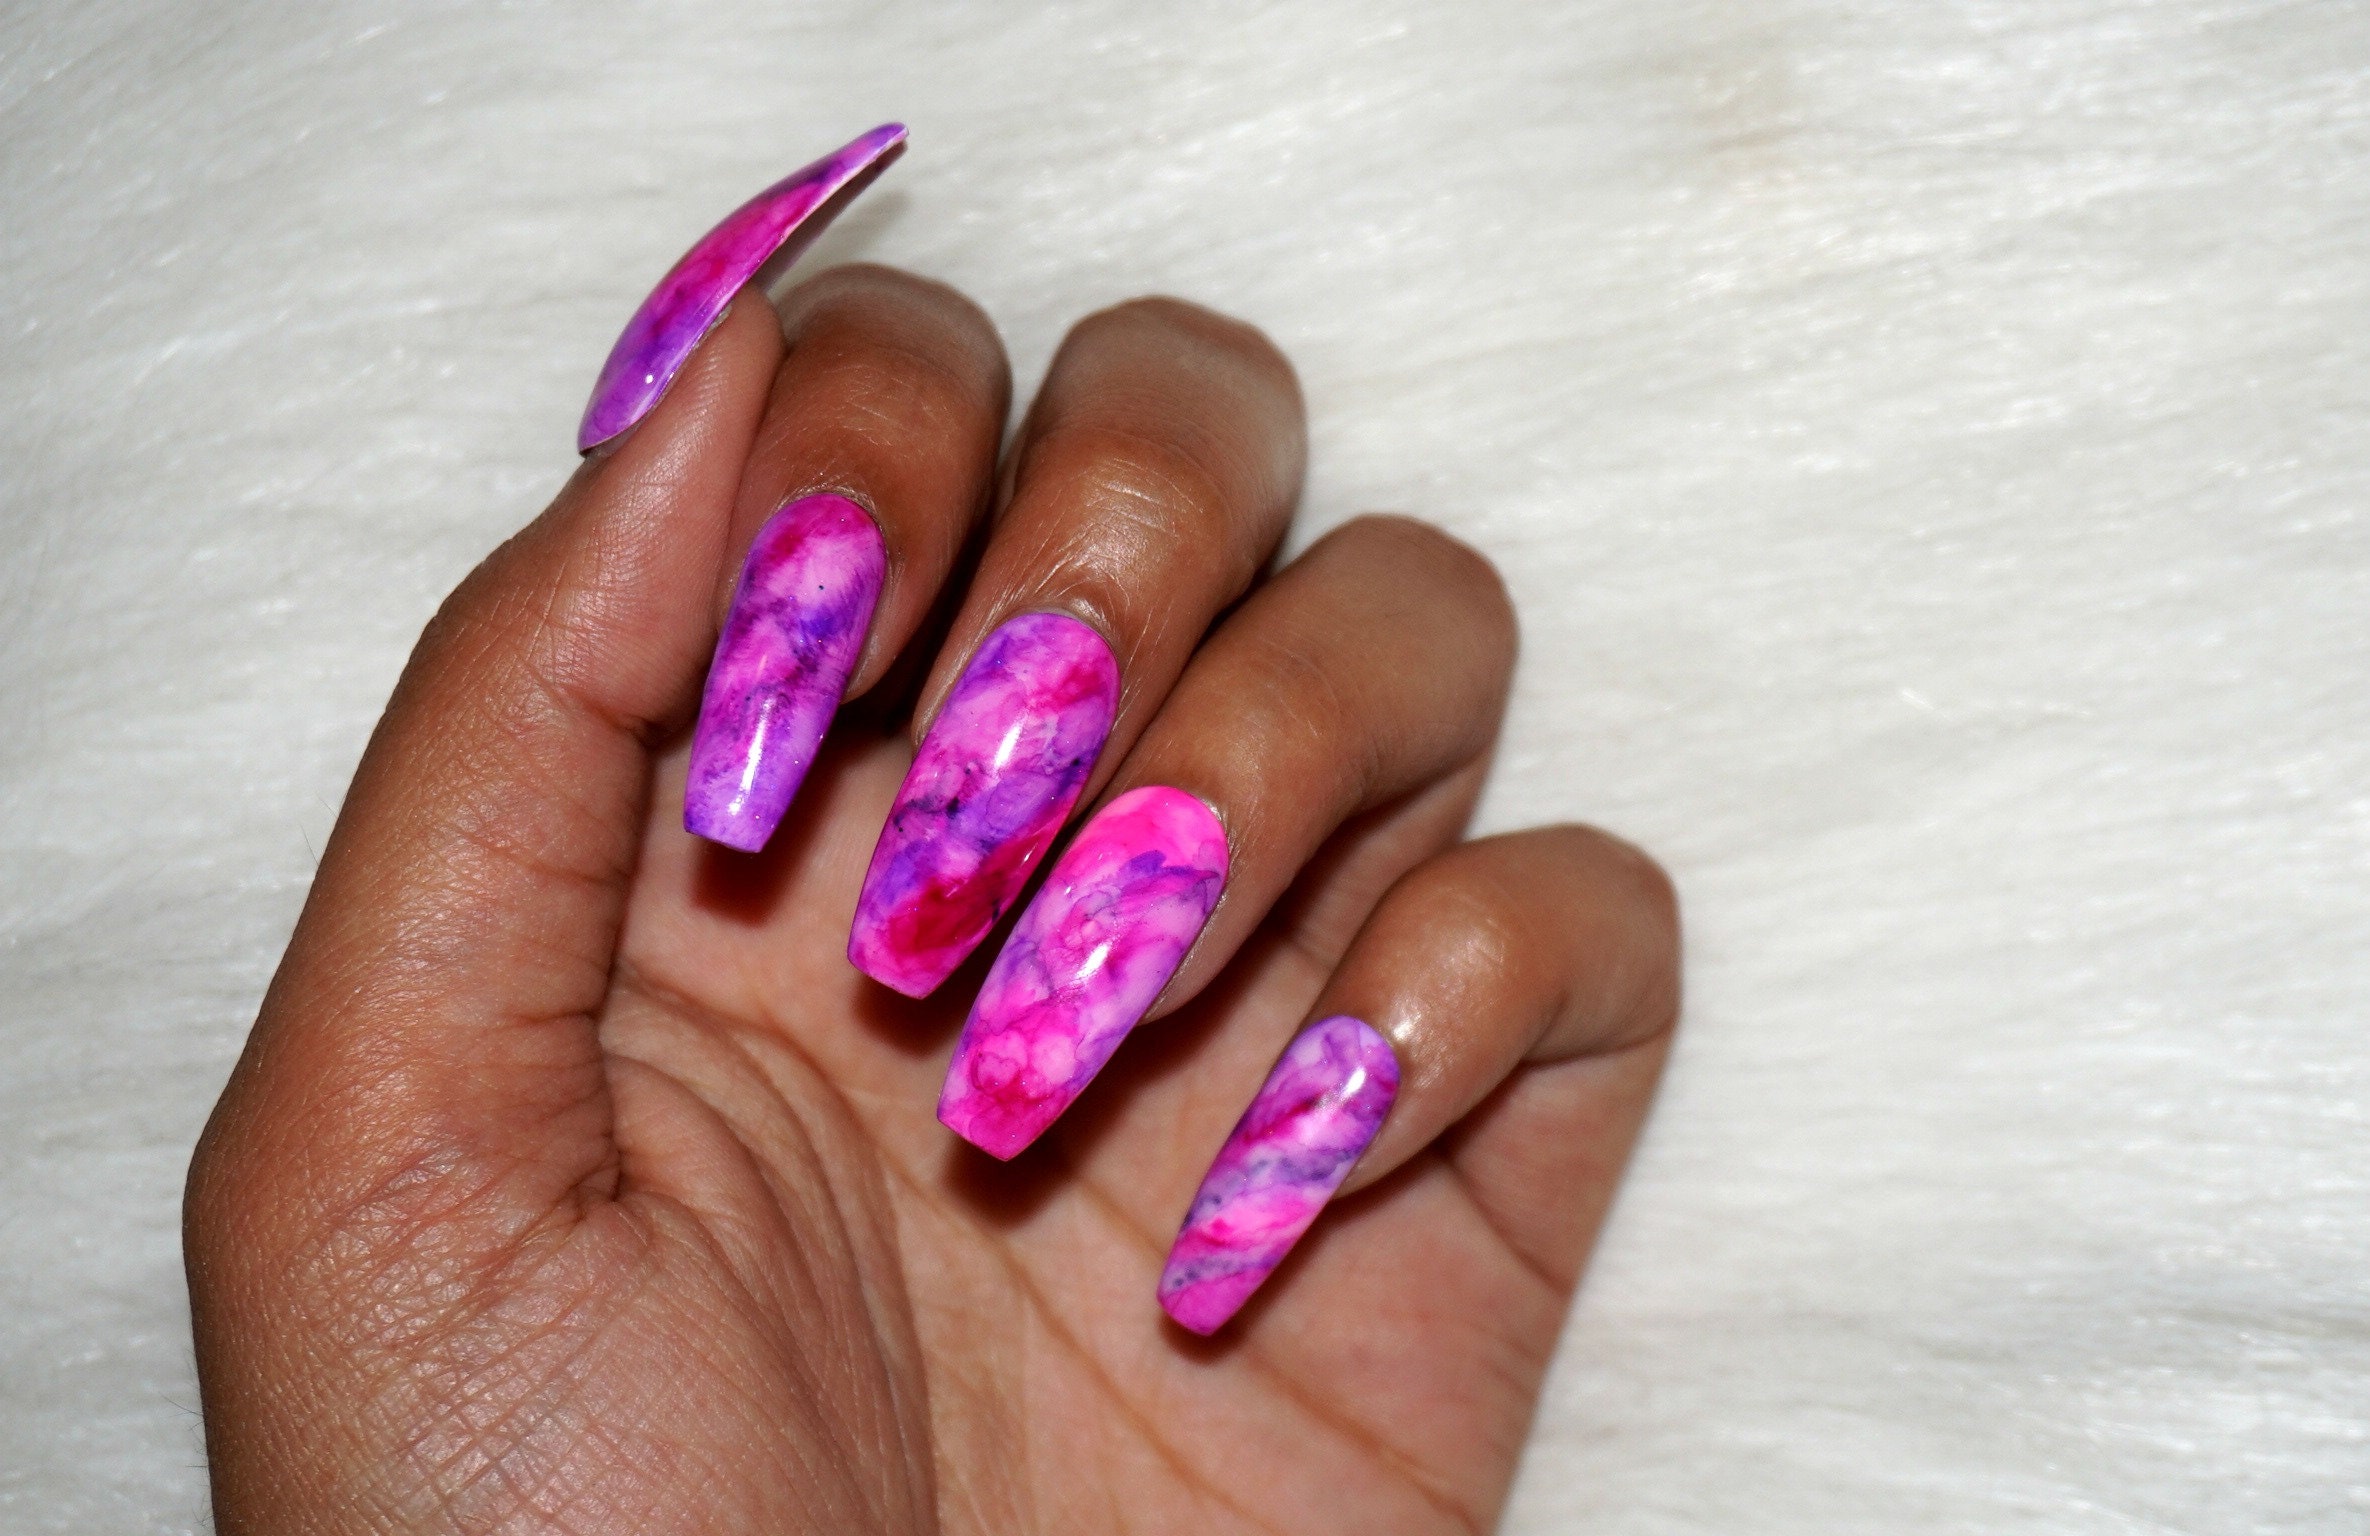 2. Pink and White Marble Nails - wide 3